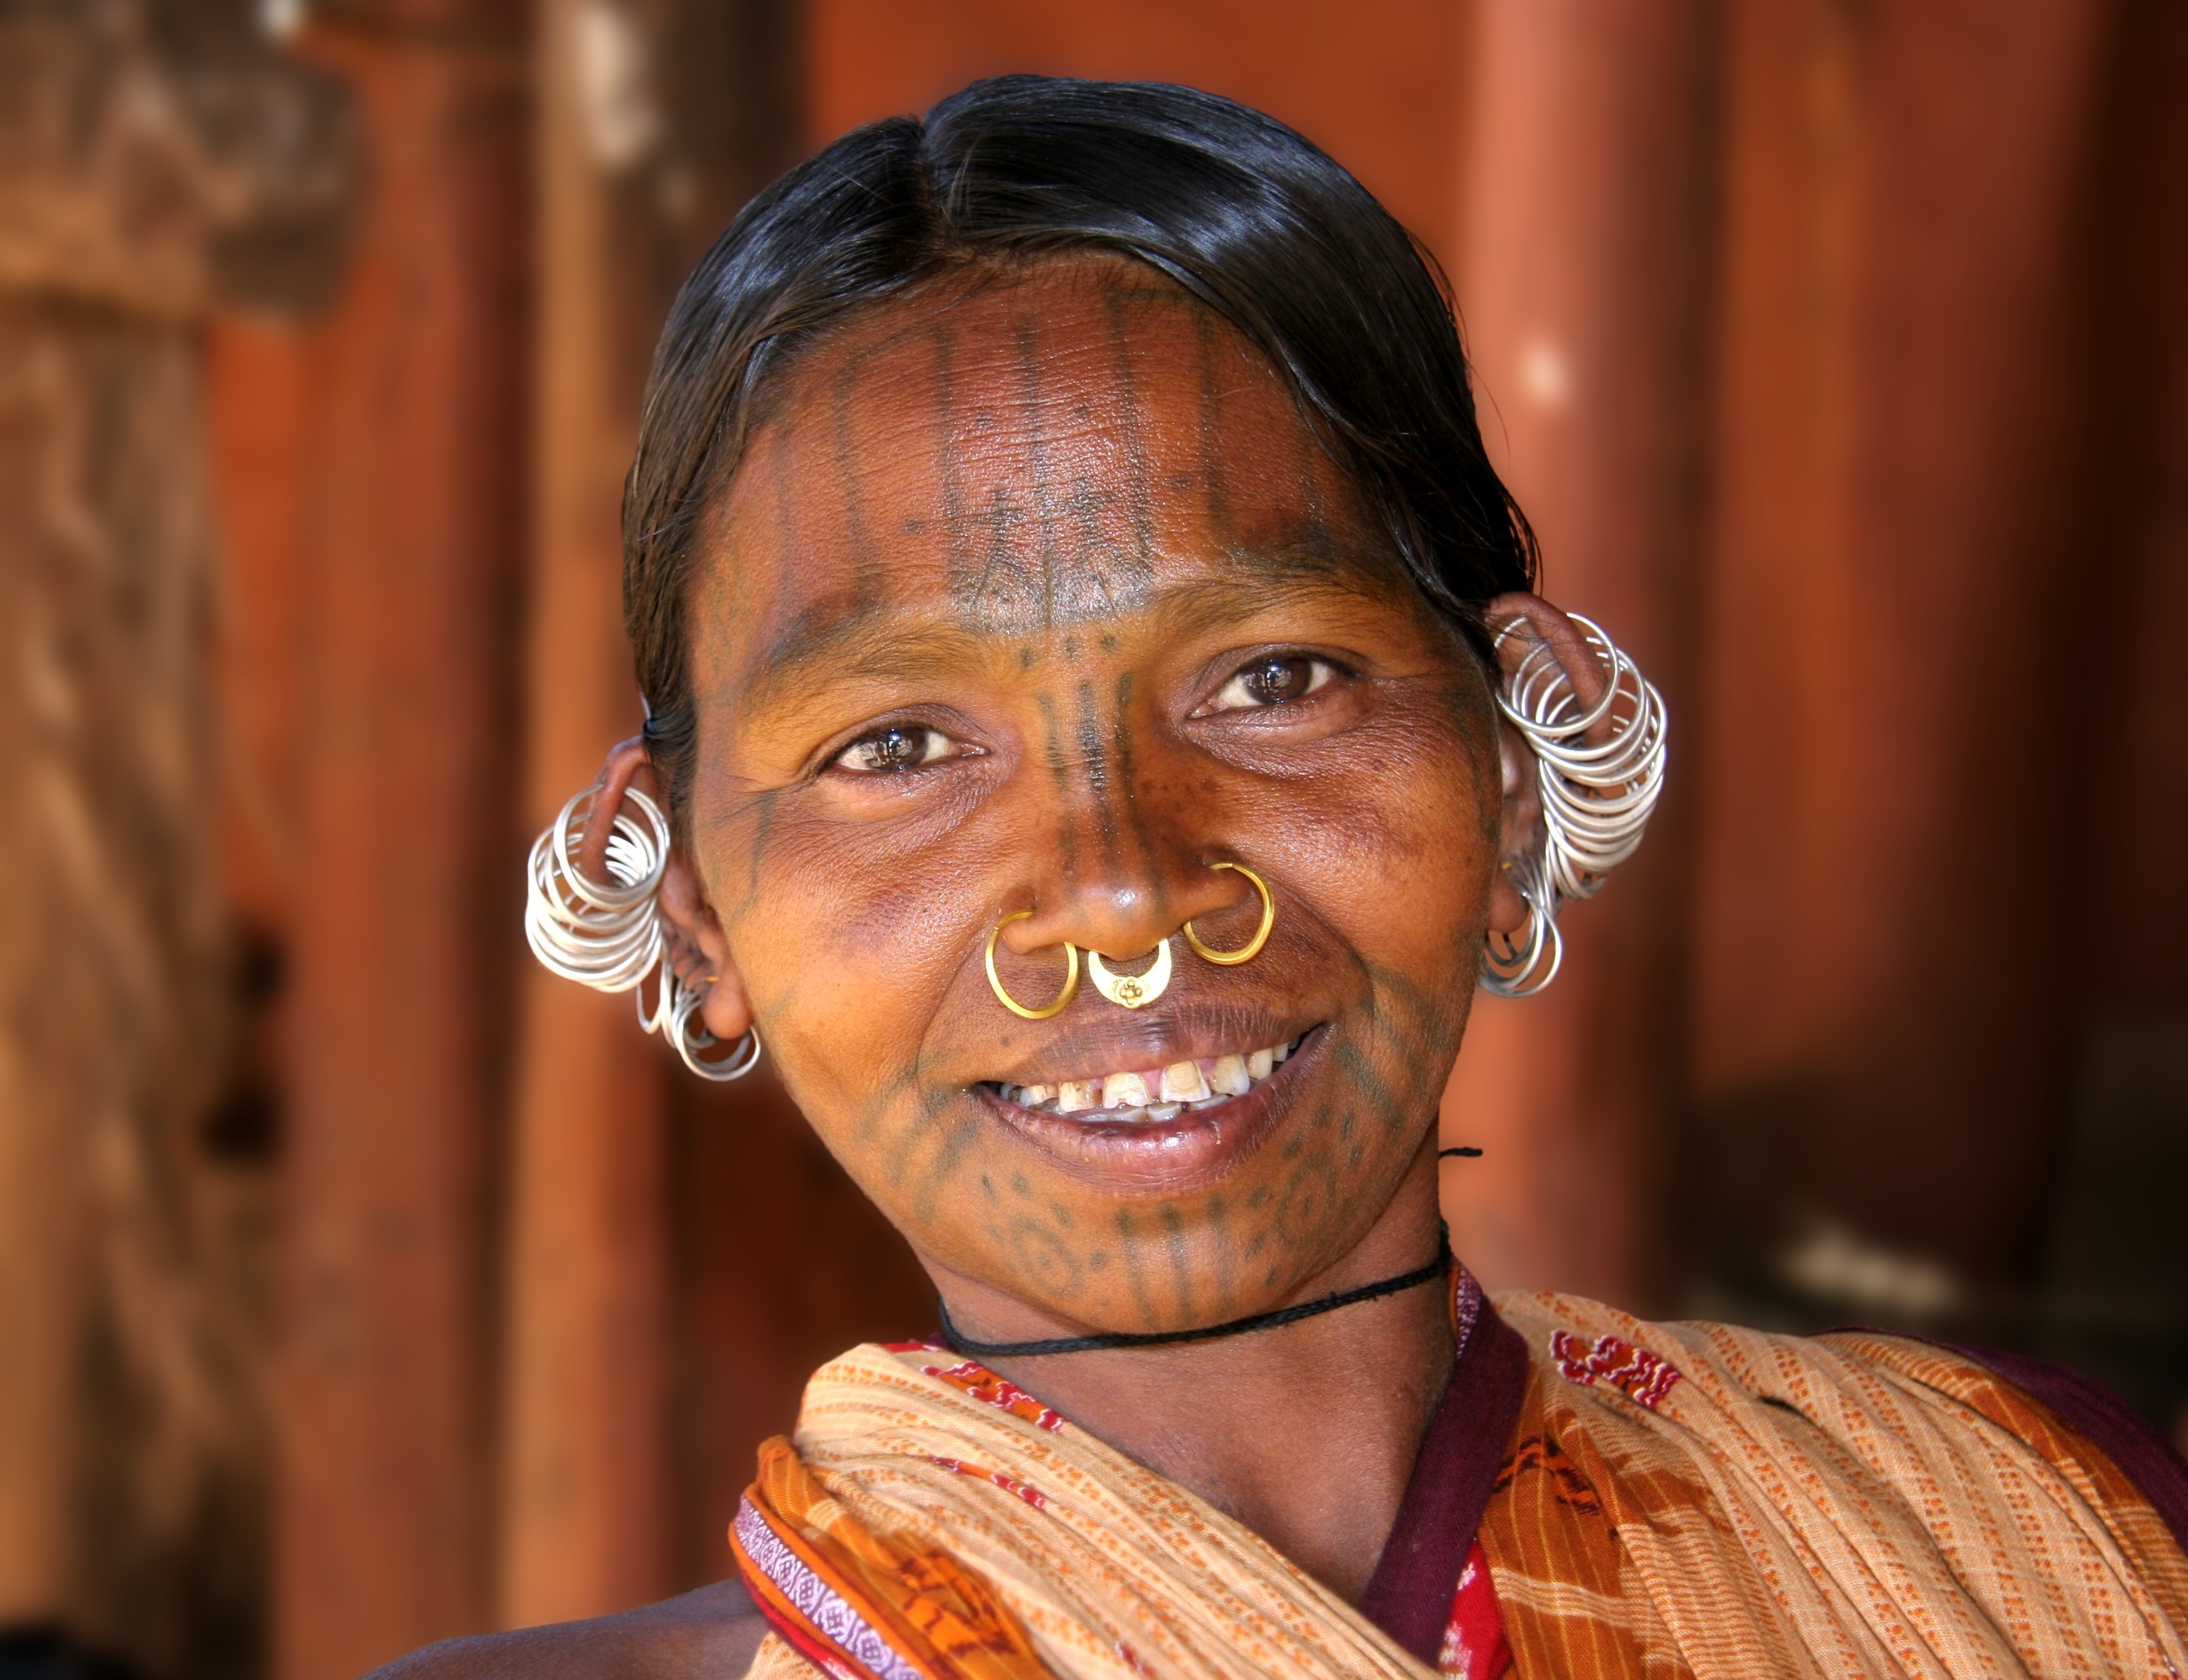 Khonds (also spelt Kondha and Kandha) are an indigenous Adivasi tribal community in India. Traditionally hunter-gatherers, they are divided into the hill-dwelling Khonds and plain-dwelling Khonds for census purposes, but the Khonds themselves identify by their specific clans. Khonds usually hold large tracts of fertile land, but still practice hunting, gathering, and slash-and-burn agriculture in the forests as a symbol of their connection to, and as an assertion of their ownership of the forests wherein they dwell. Khonds speak the Kui language and write it in the Odia script.
The Khonds are the largest tribal group in the state of Odisha. They are known for their rich cultural heritage, valourous martial traditions, and indigenous values, which center on harmony with nature. The Kandhamal district in Odisha has a fifty-five percent Khond population, and is named after the tribe.
They are a designated Scheduled Tribe in the states of Andhra Pradesh, Bihar, Chhattisgarh, Madhya Pradesh, Maharashtra, Odisha, Jharkhand and West Bengal.